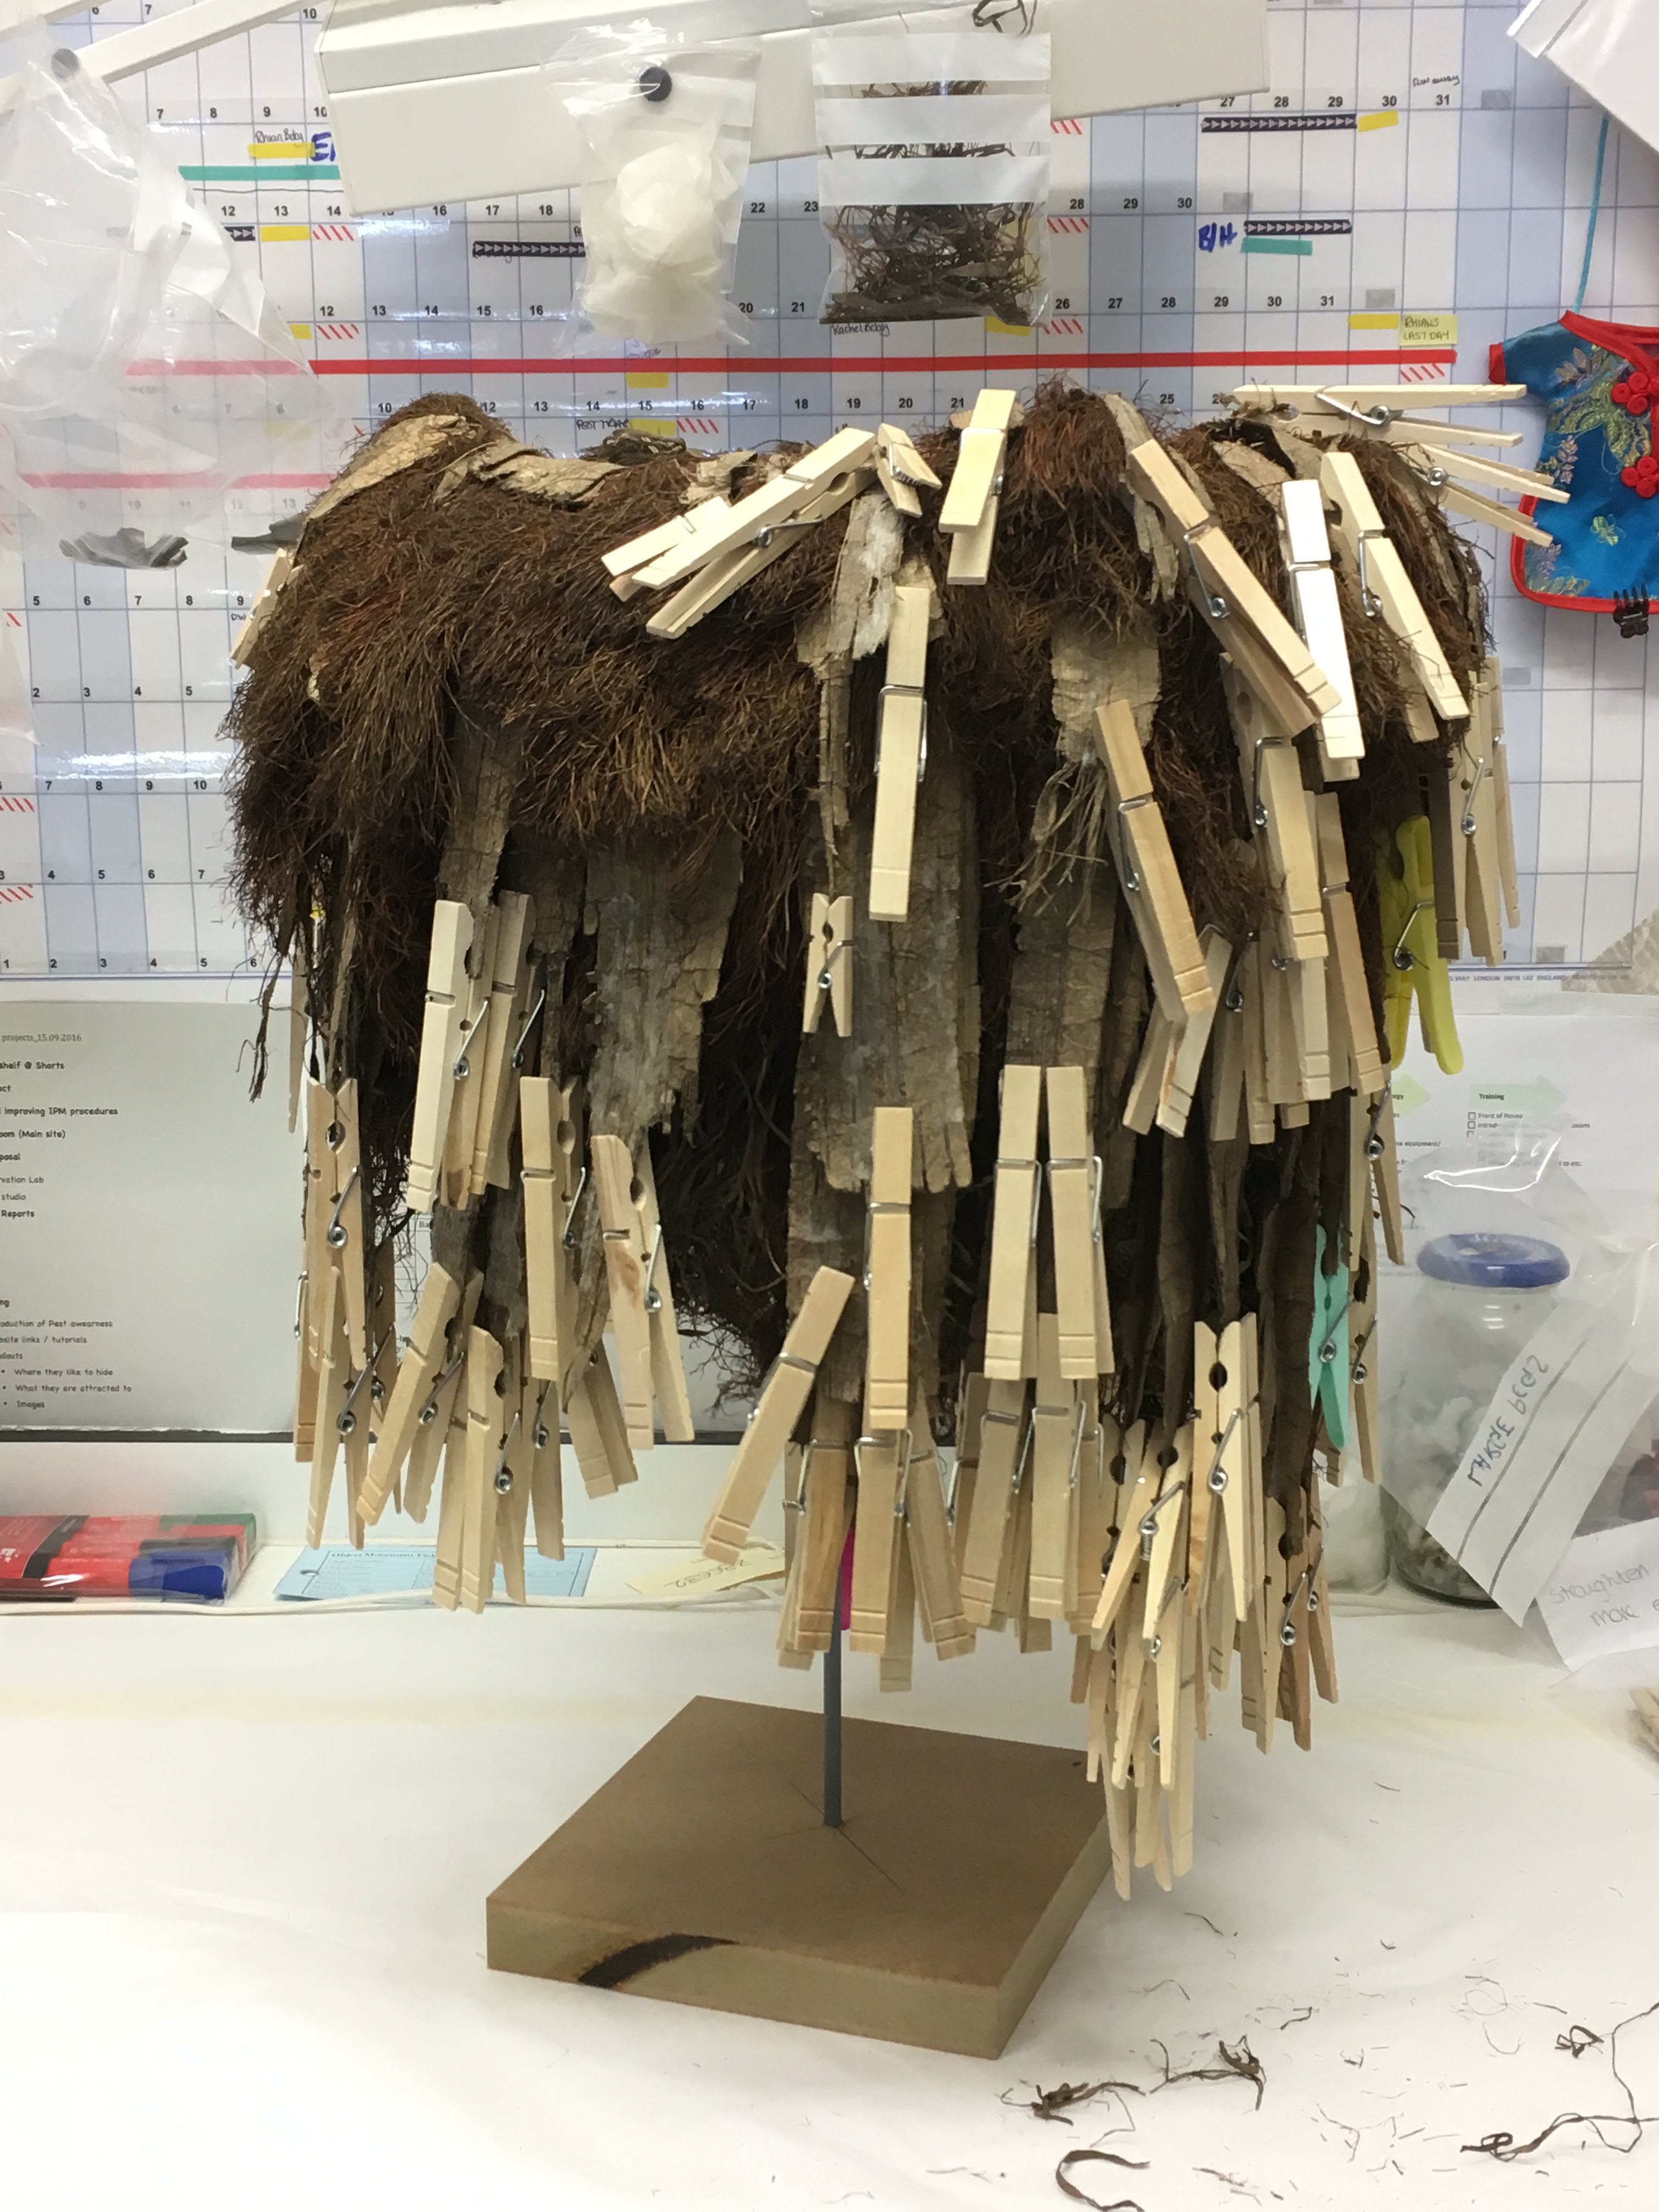 A fibre skirt from Papua New Guinea covered in wooden pegs